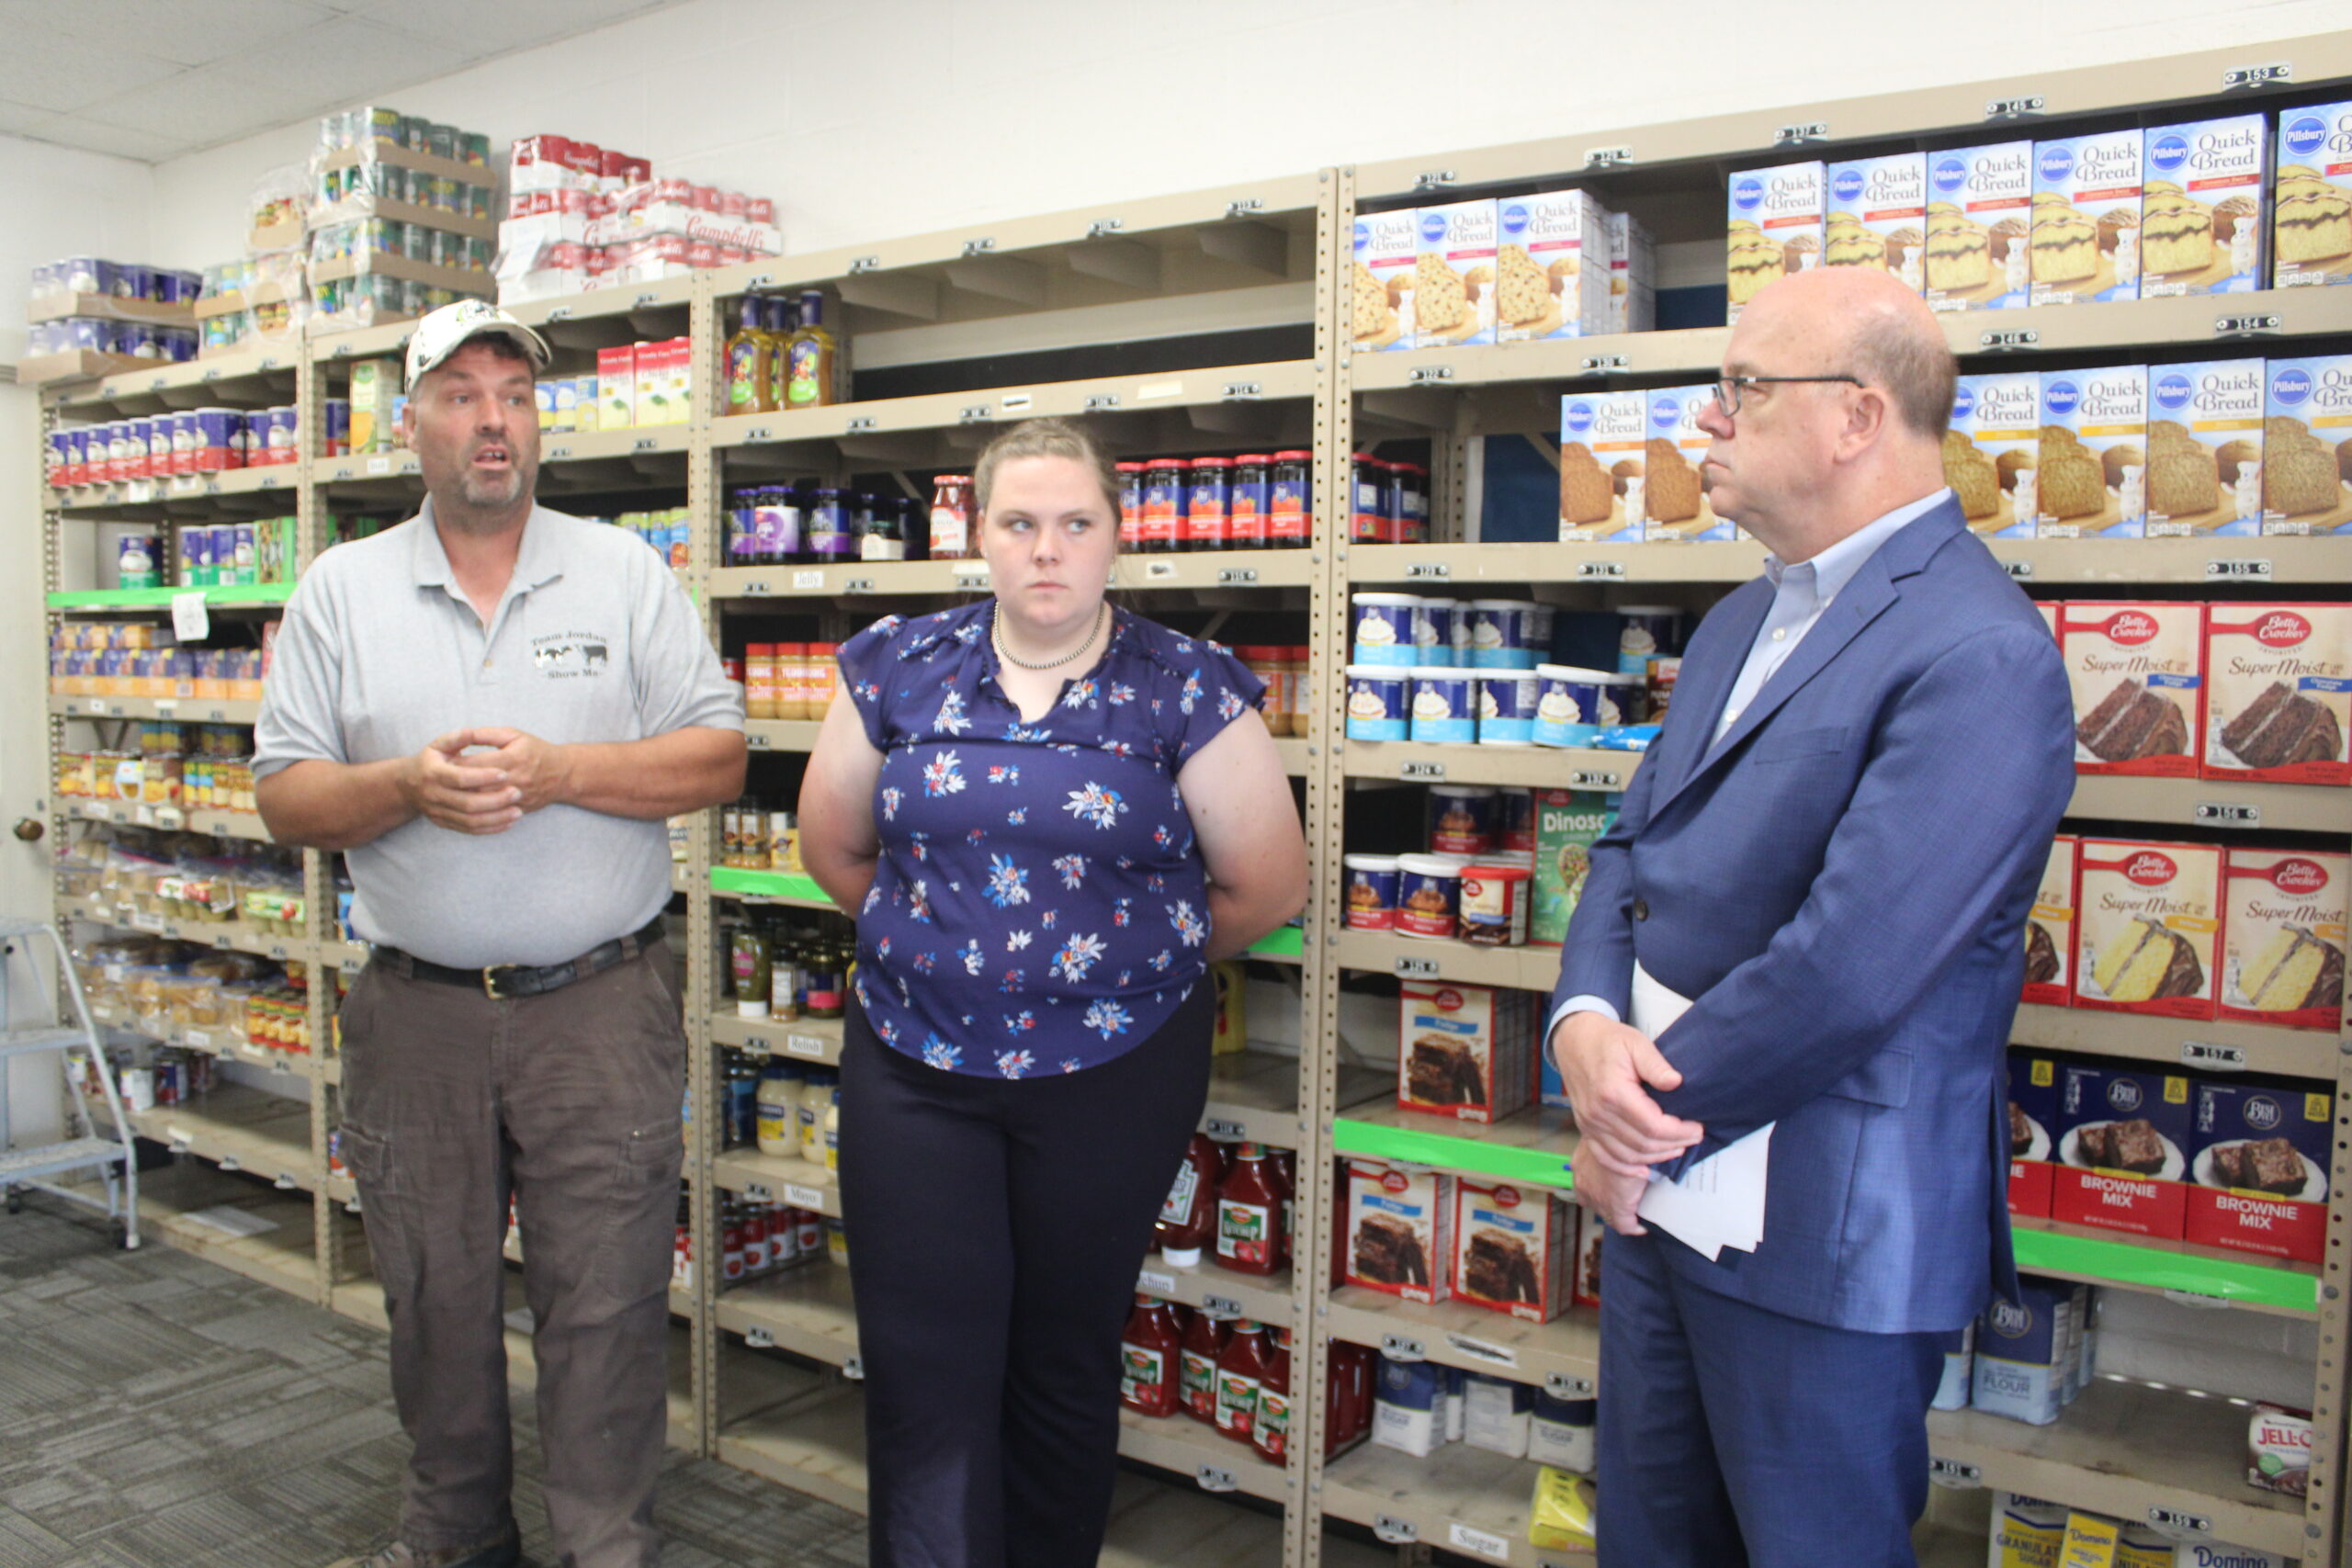 ‘We’re very grateful’: Rep. McGovern touts recent donation to Grafton Food Bank